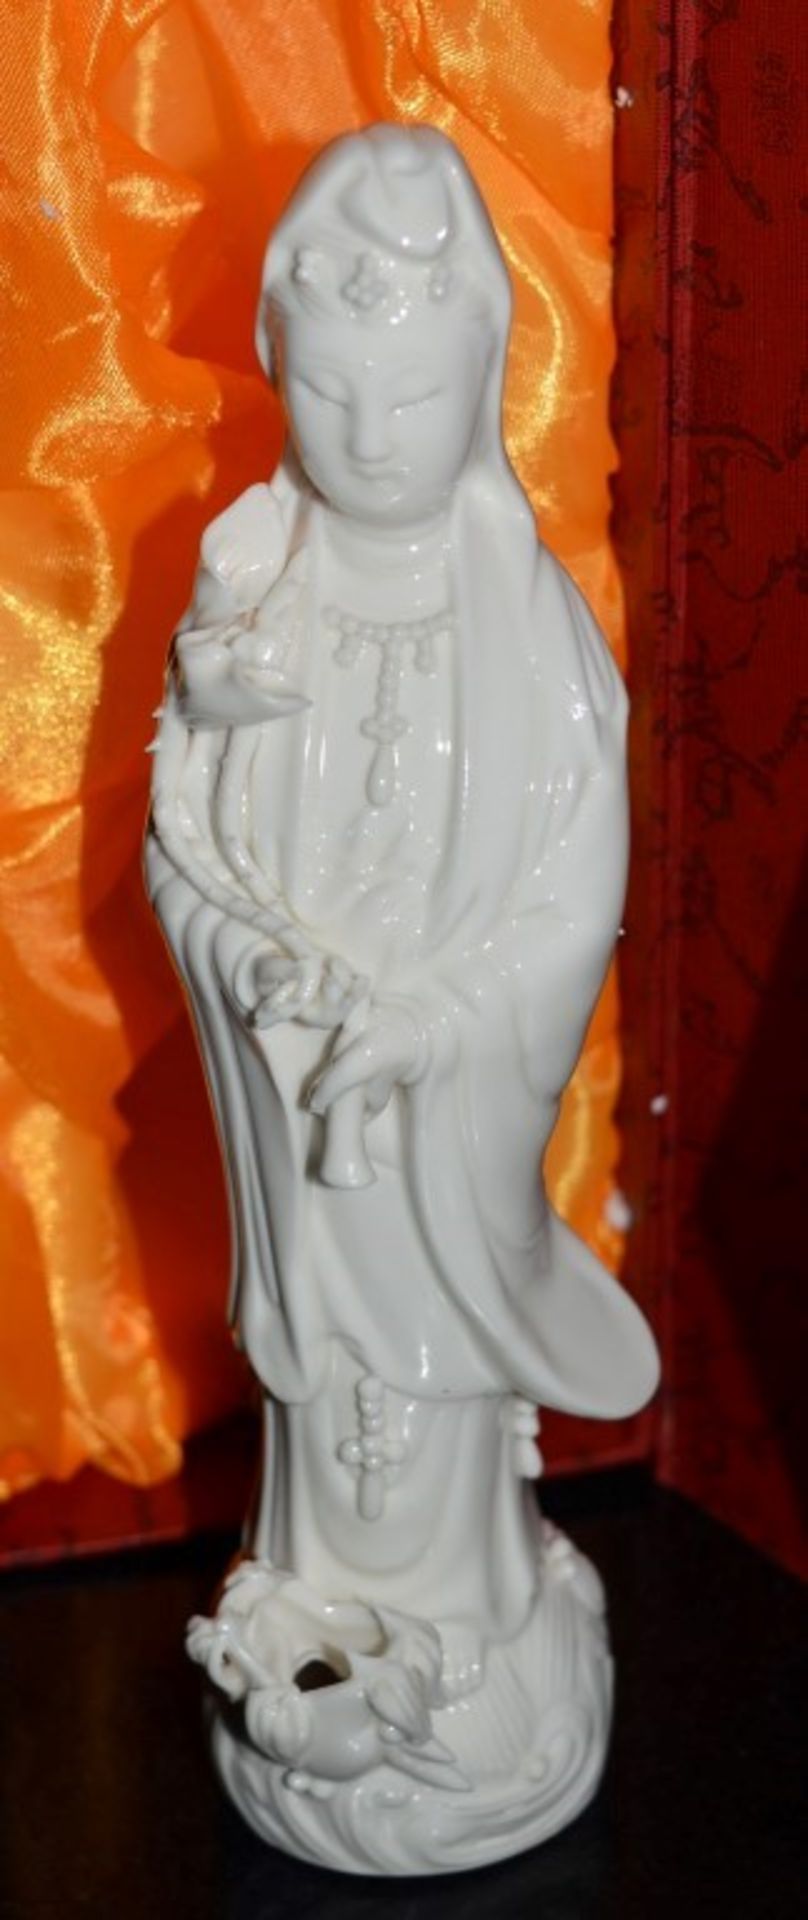 30 x Oriental Chinese Figurines in Gift Boxes - Porcelain Figurines Standing 8 Inches Tall - Brand - Image 4 of 7